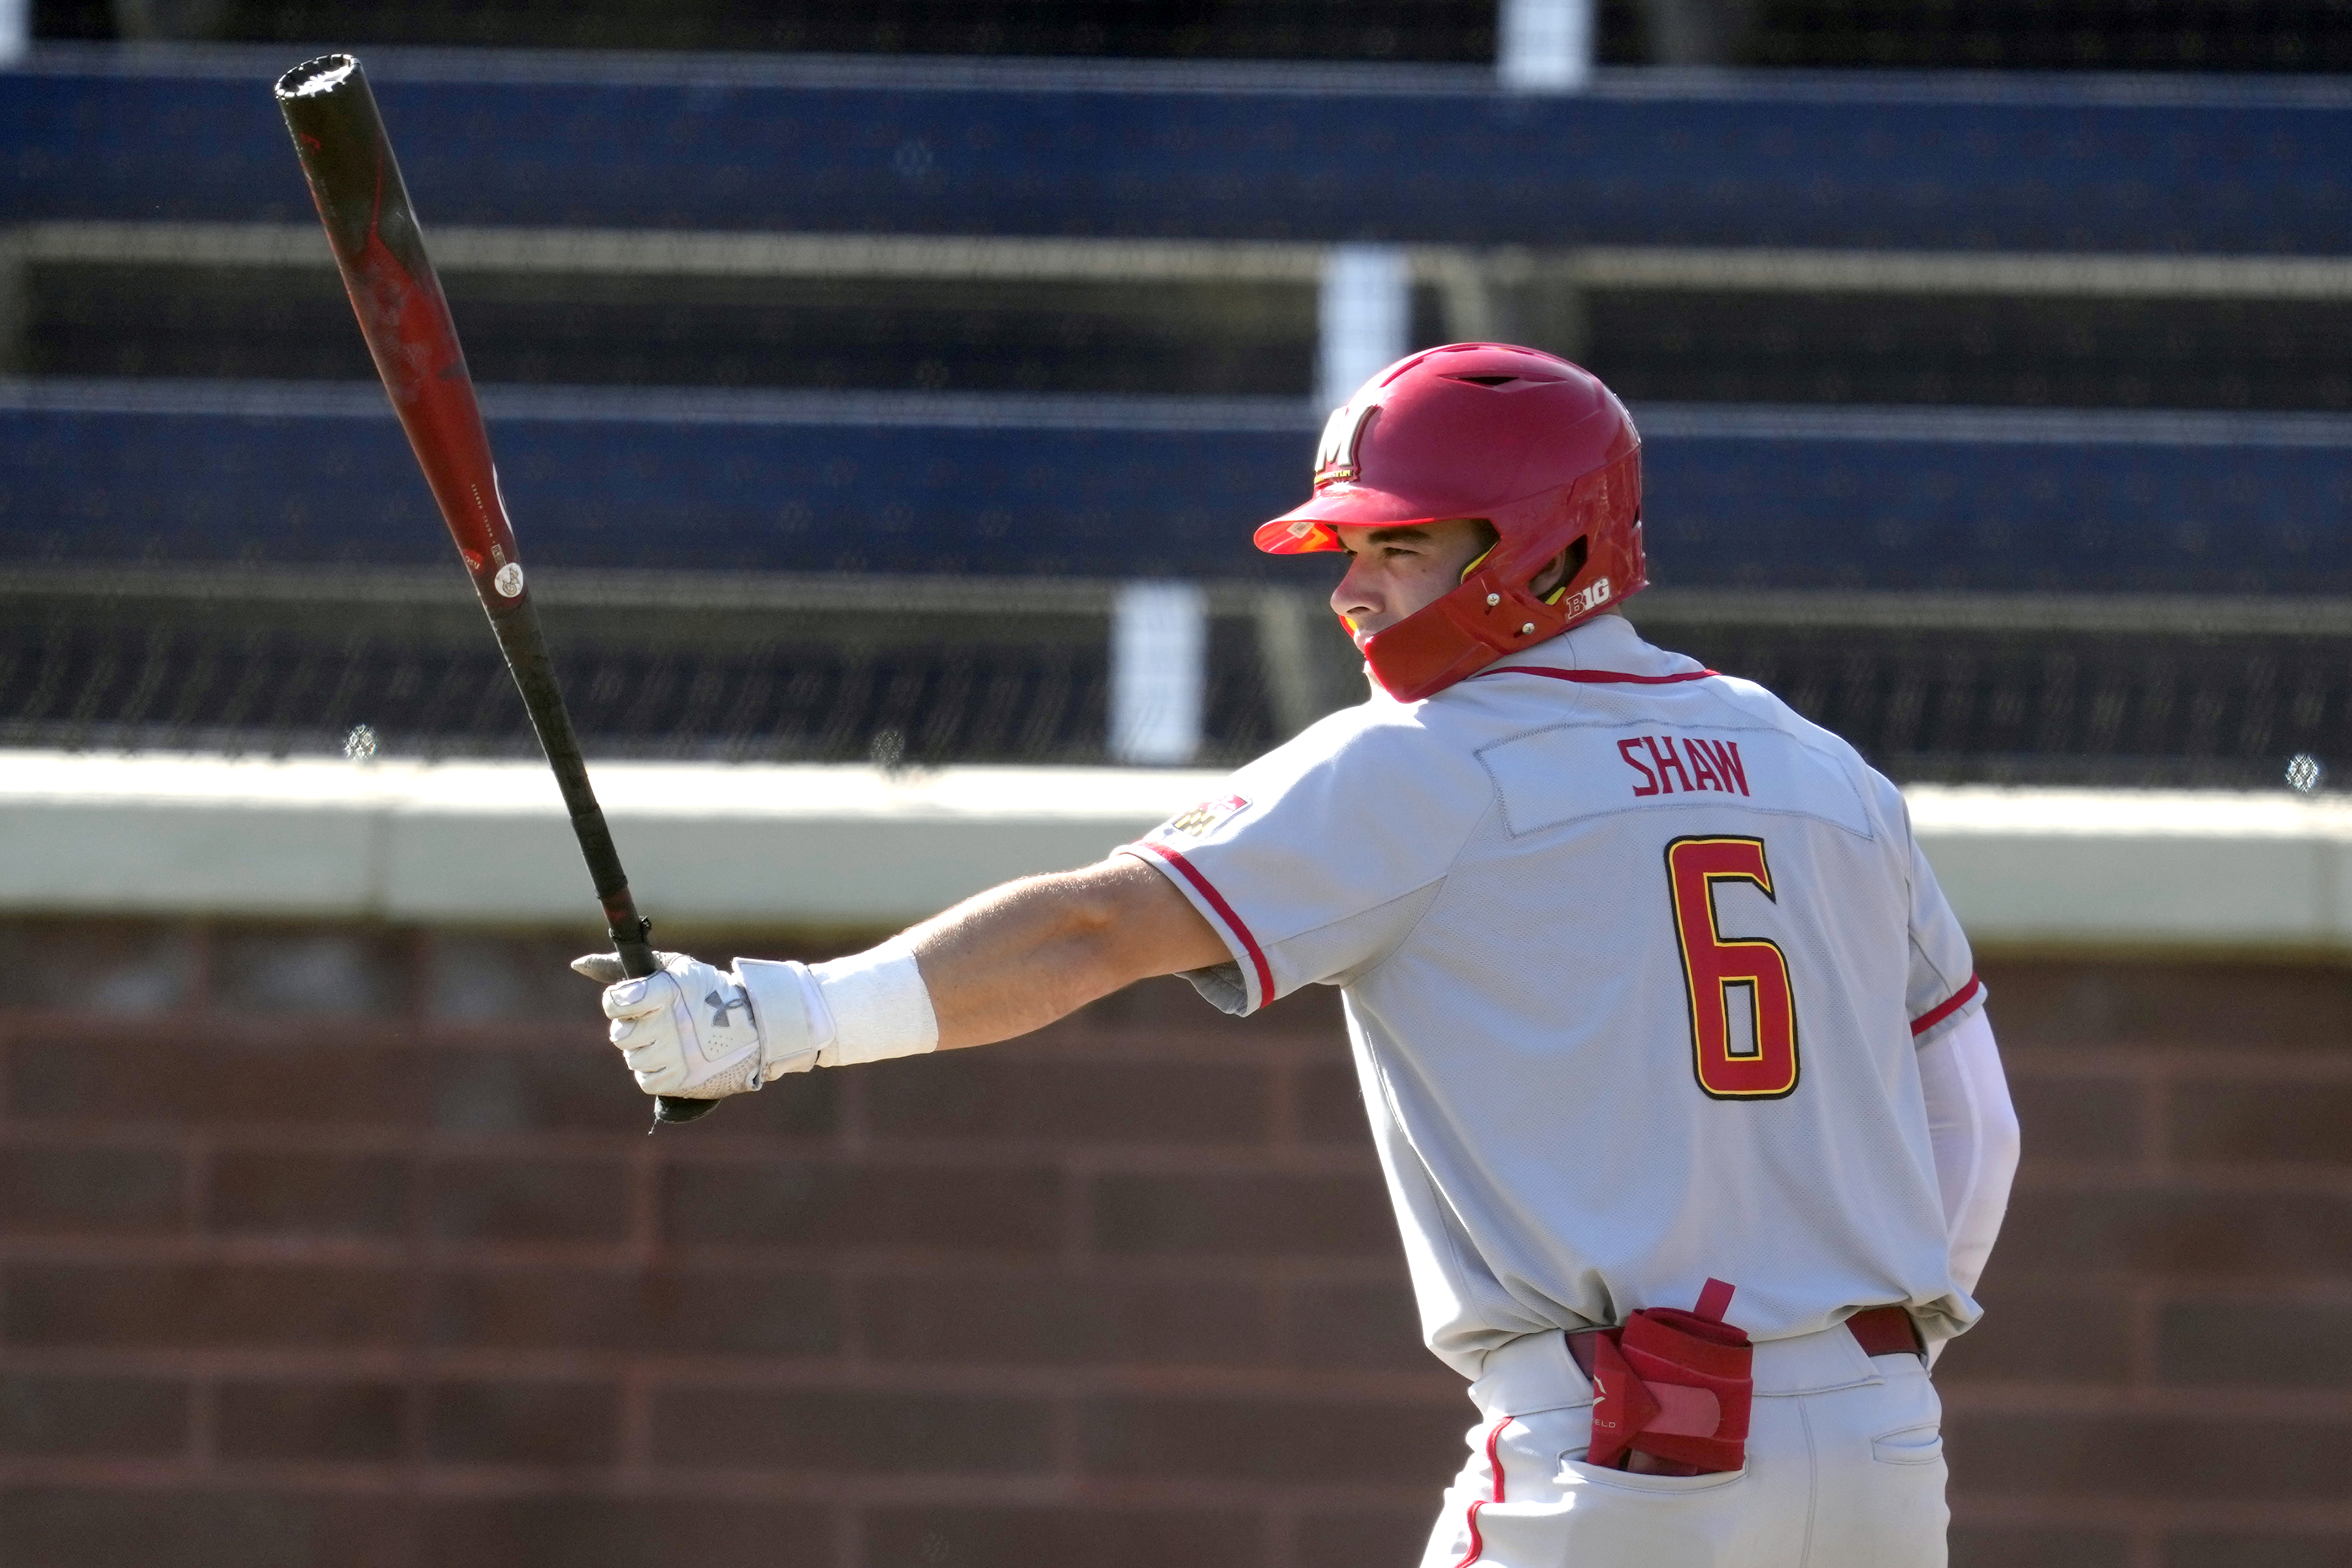 Matt Shaw selected No. 13 overall in 2023 MLB Draft by Chicago